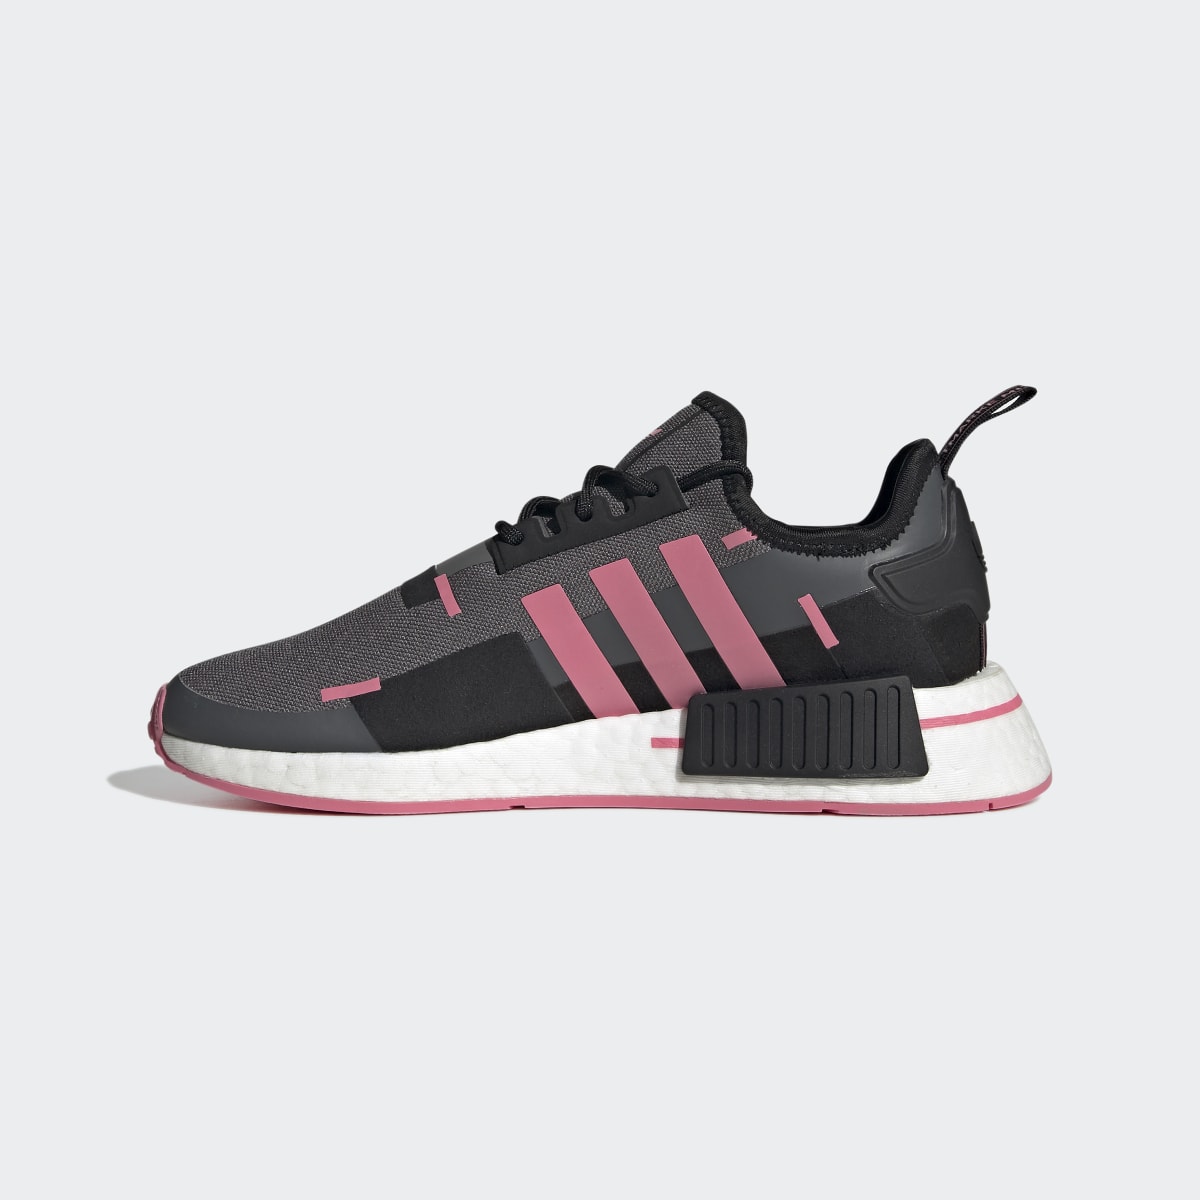 Adidas NMD_R1 Shoes. 10